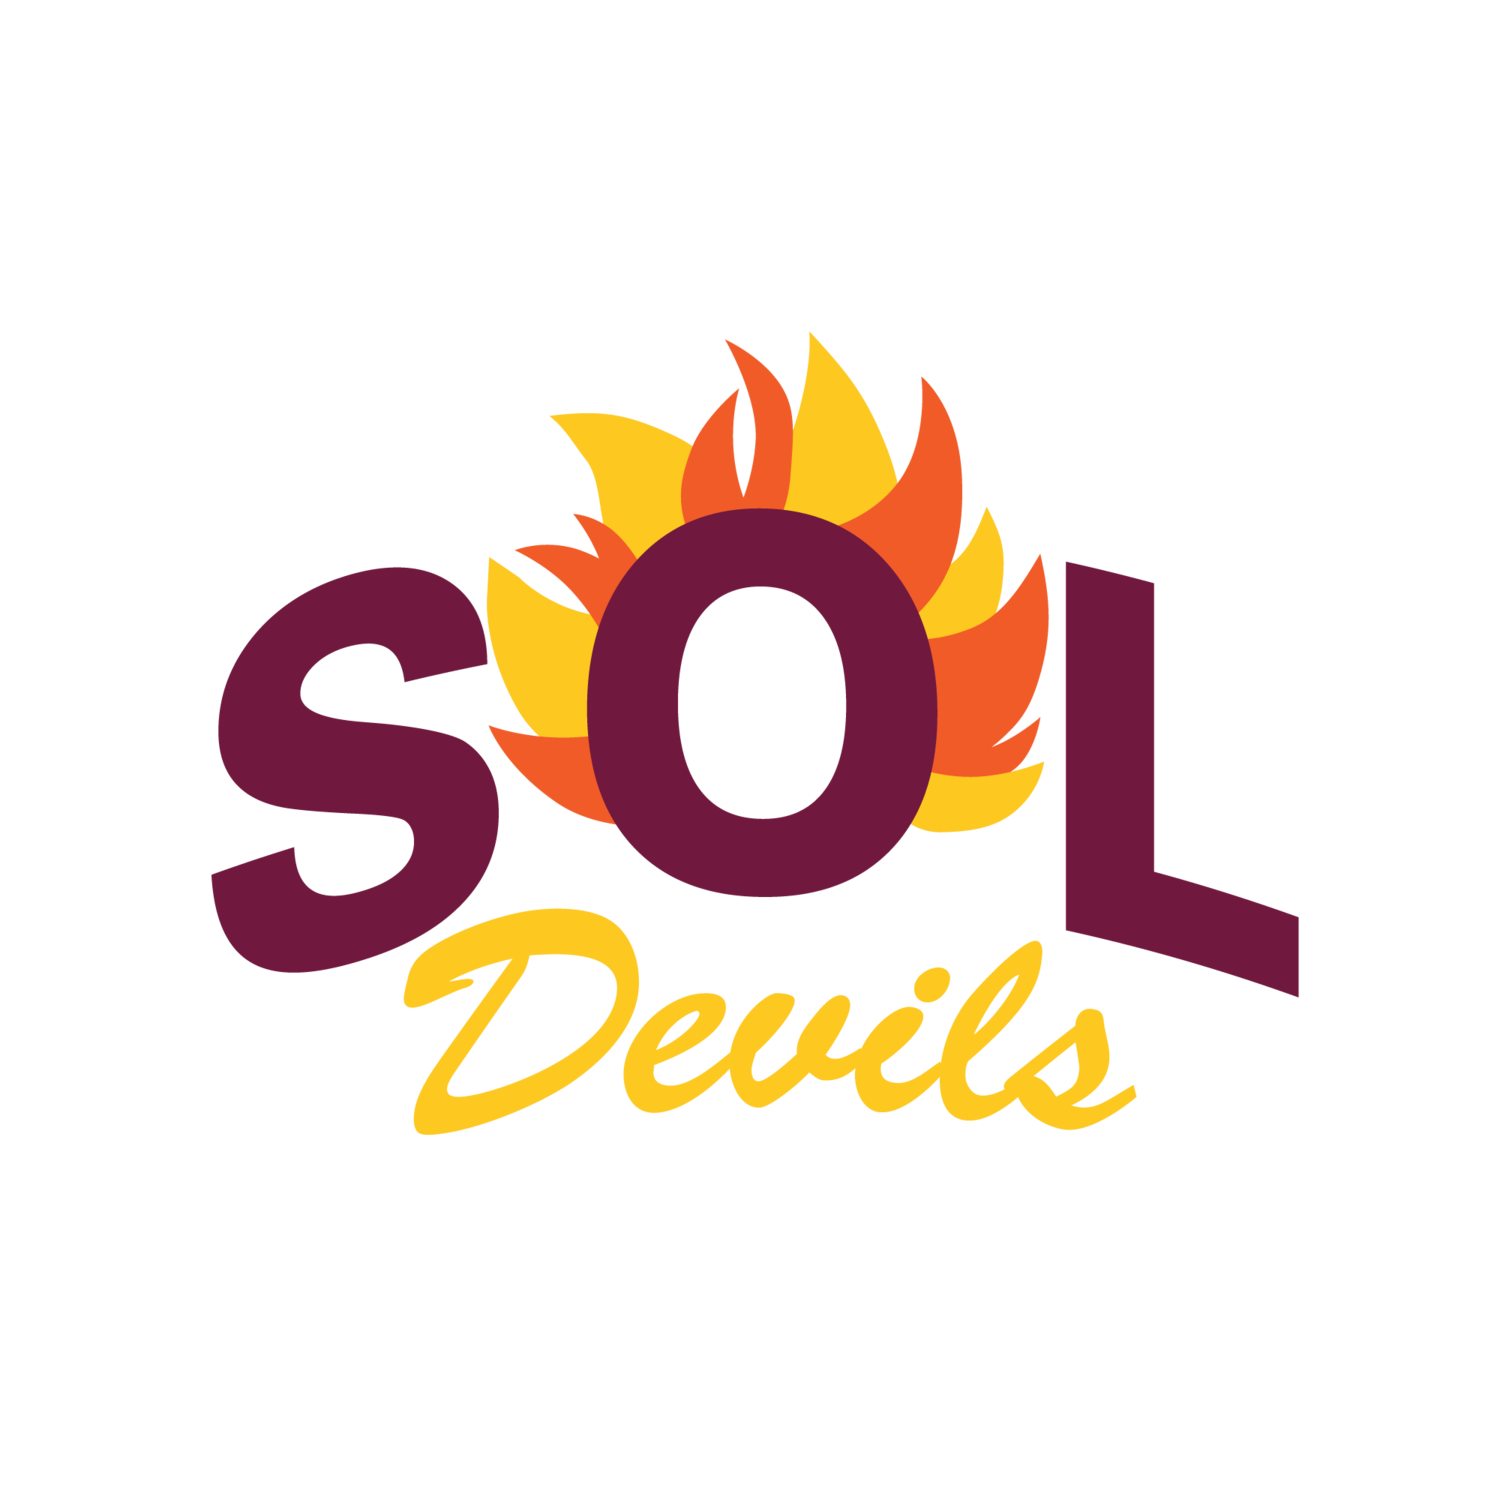 The Sol Devils